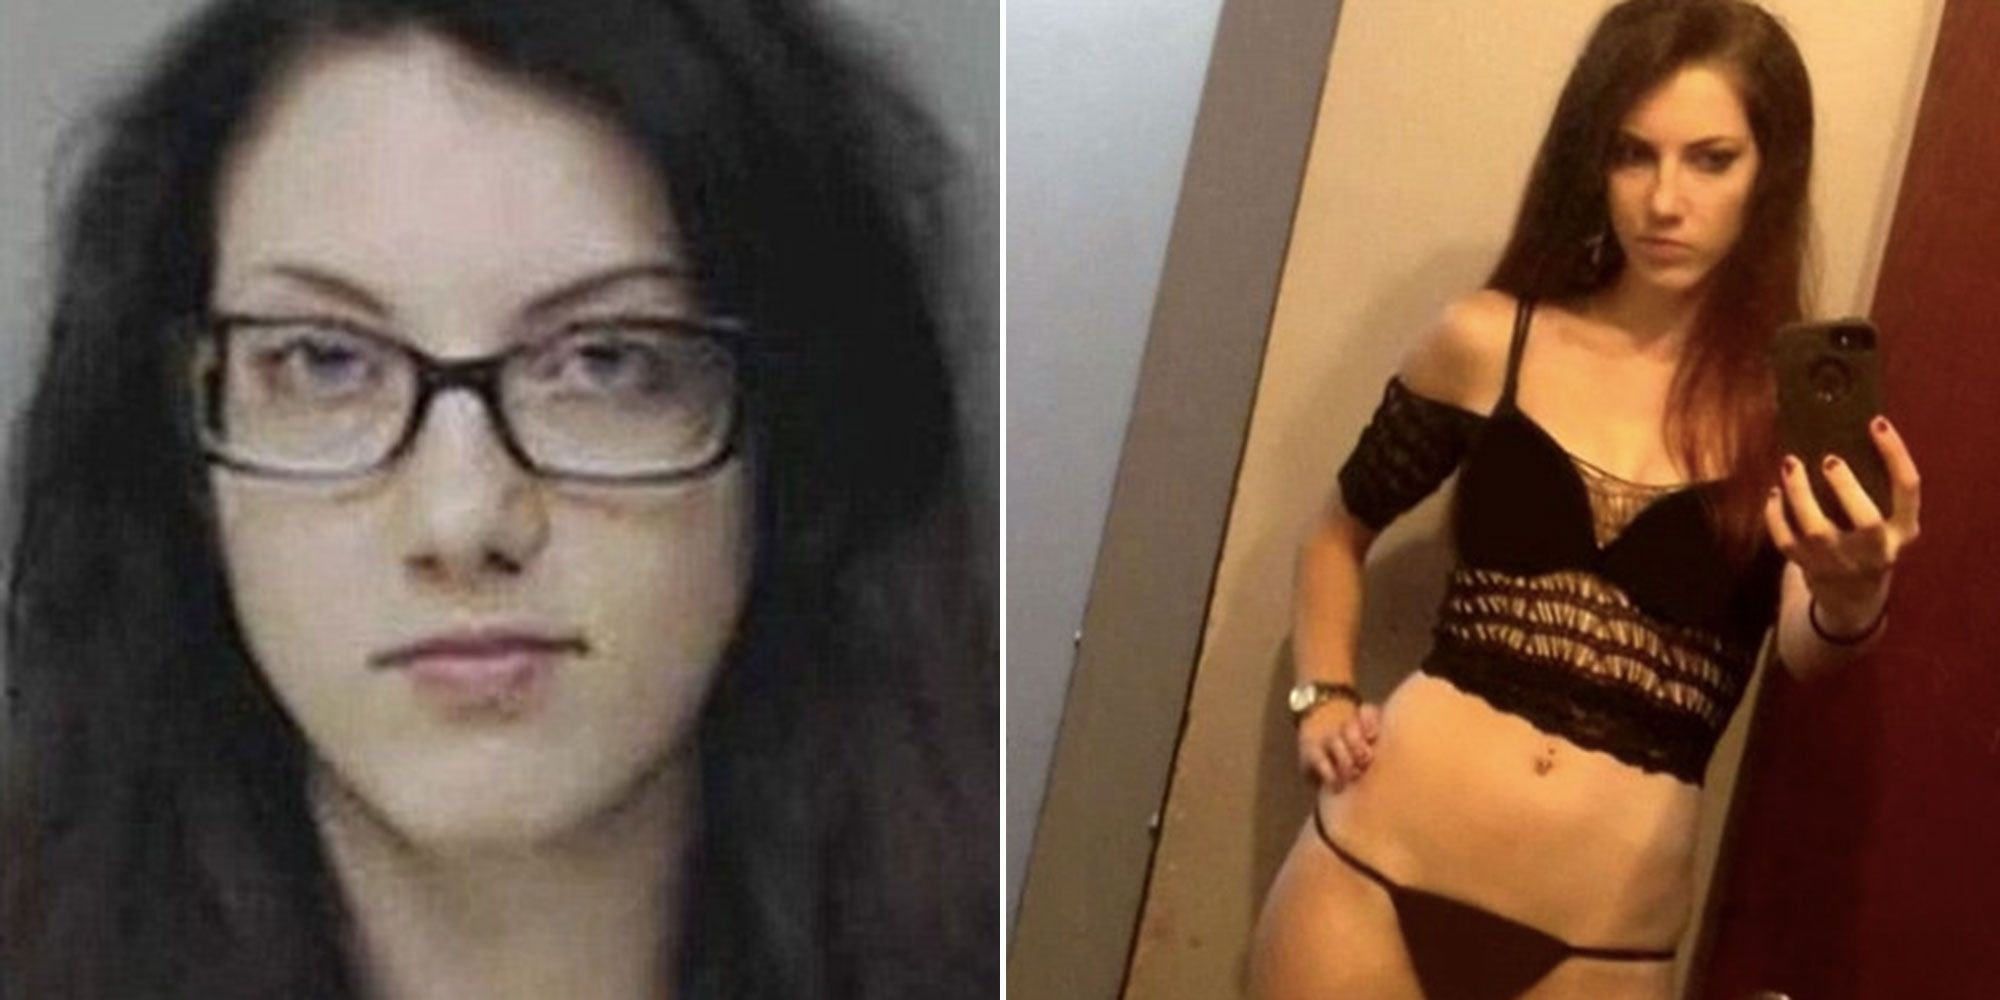 24-Year-Old Teacher Pleads Not Guilty to Sexually Exploiting Student